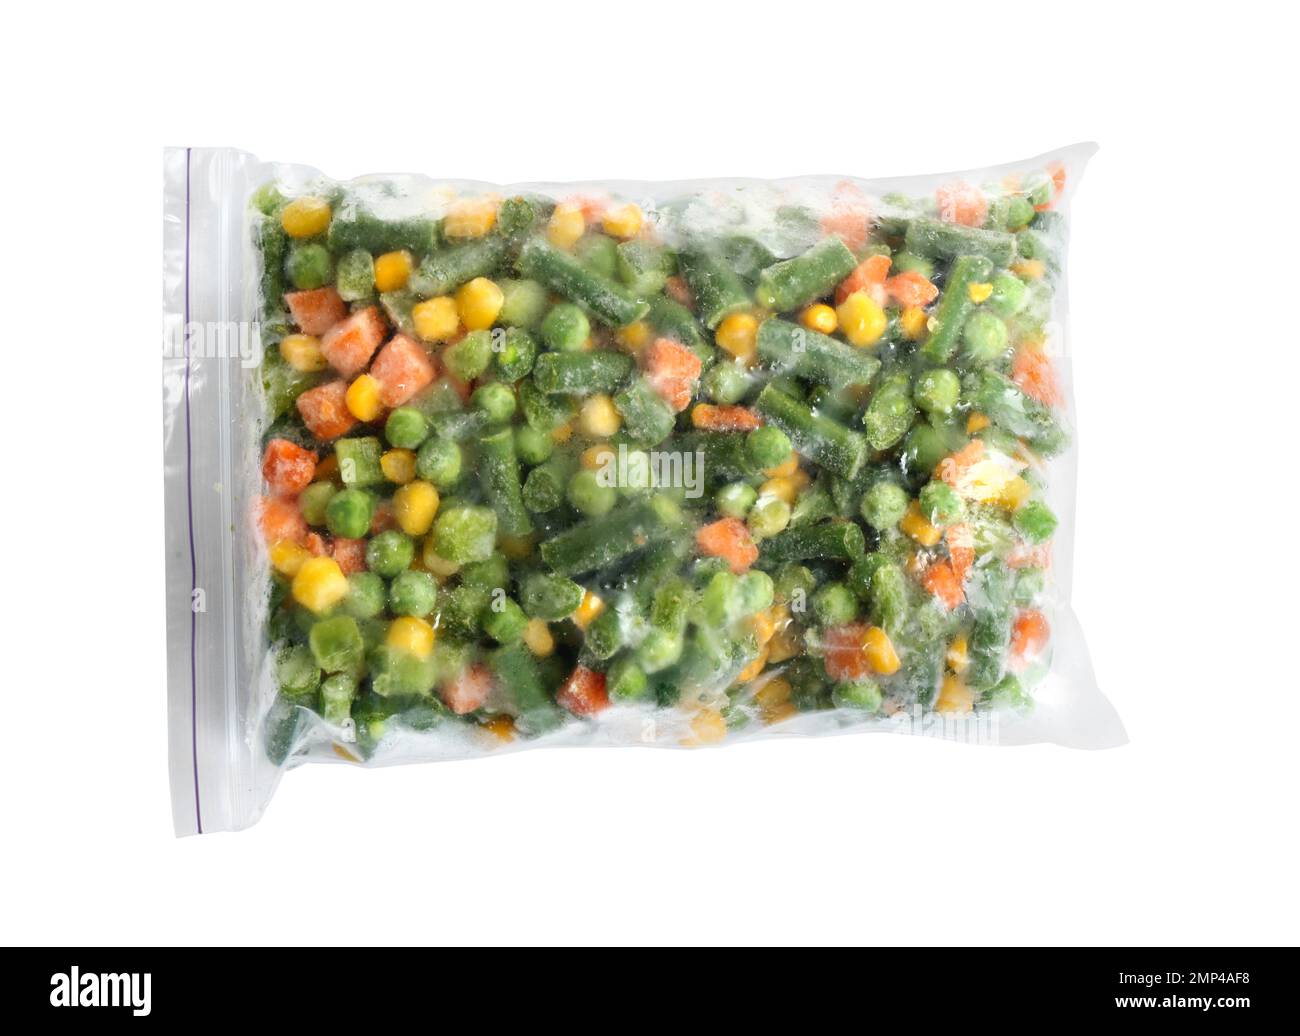 Frozen vegetables in plastic bag isolated on white, top view Stock Photo